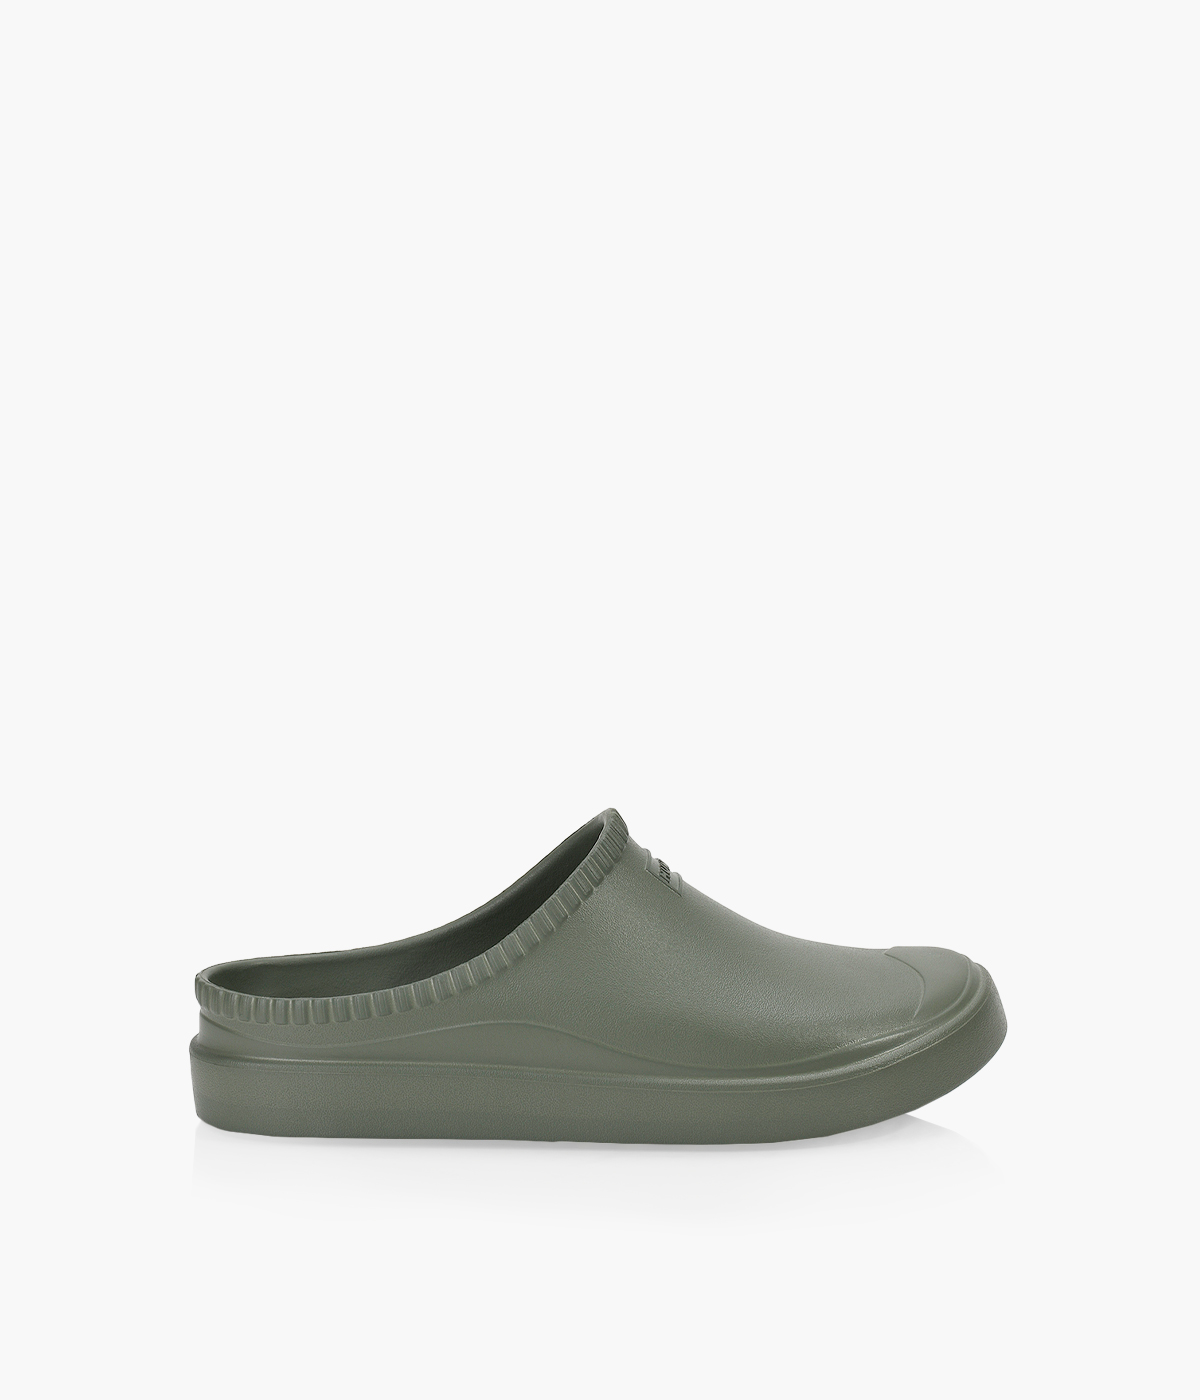 HUNTER IN/OUT BLOOM ALGAE FOAM CLOG - Rubber | Browns Shoes